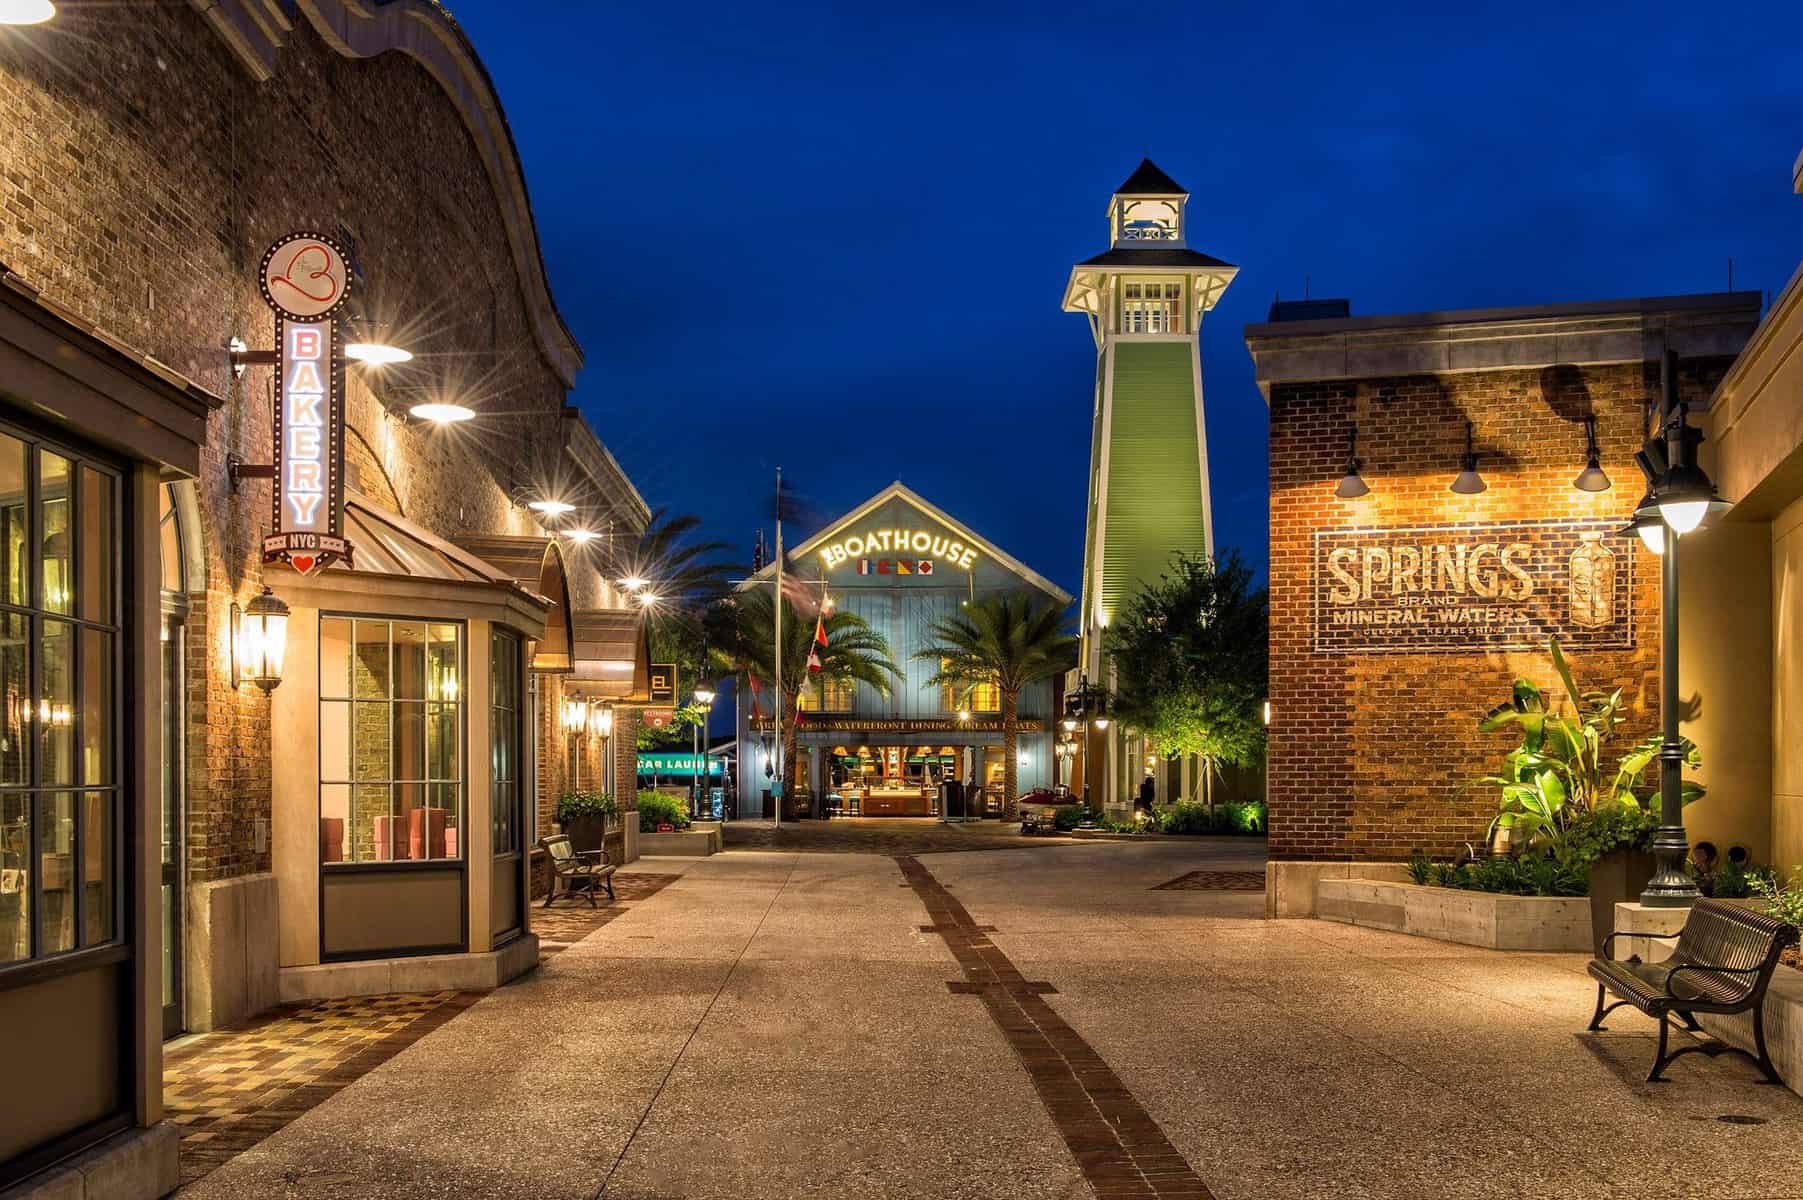 Pros and Cons for All Disney Springs Restaurants